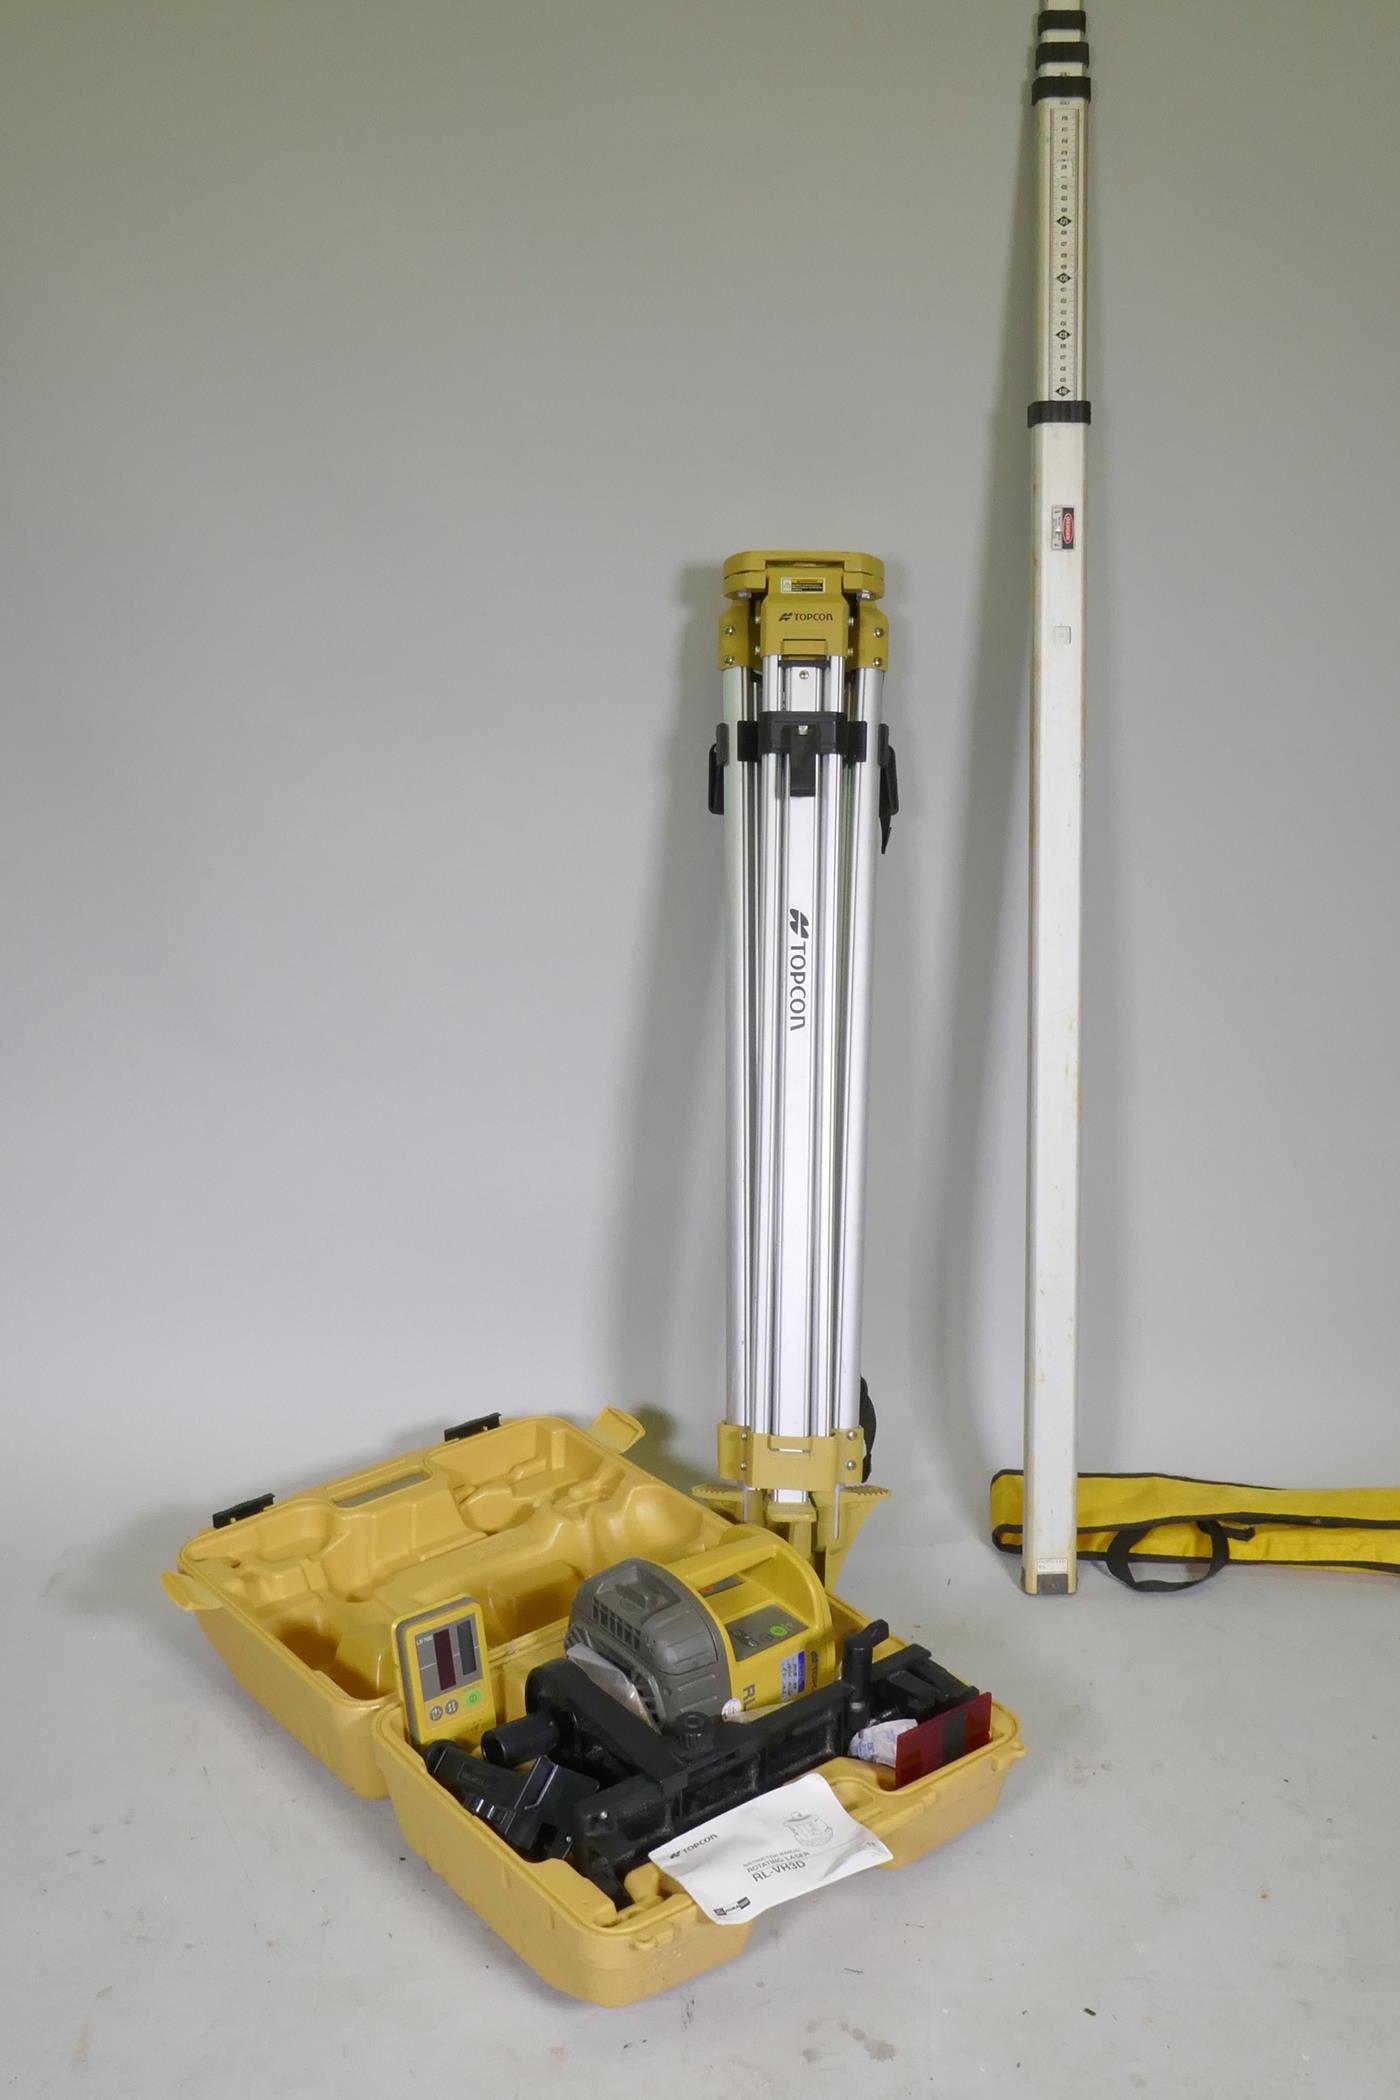 A Topcon RL-VH3D Rotating surveyor's laser, with tripod and staff